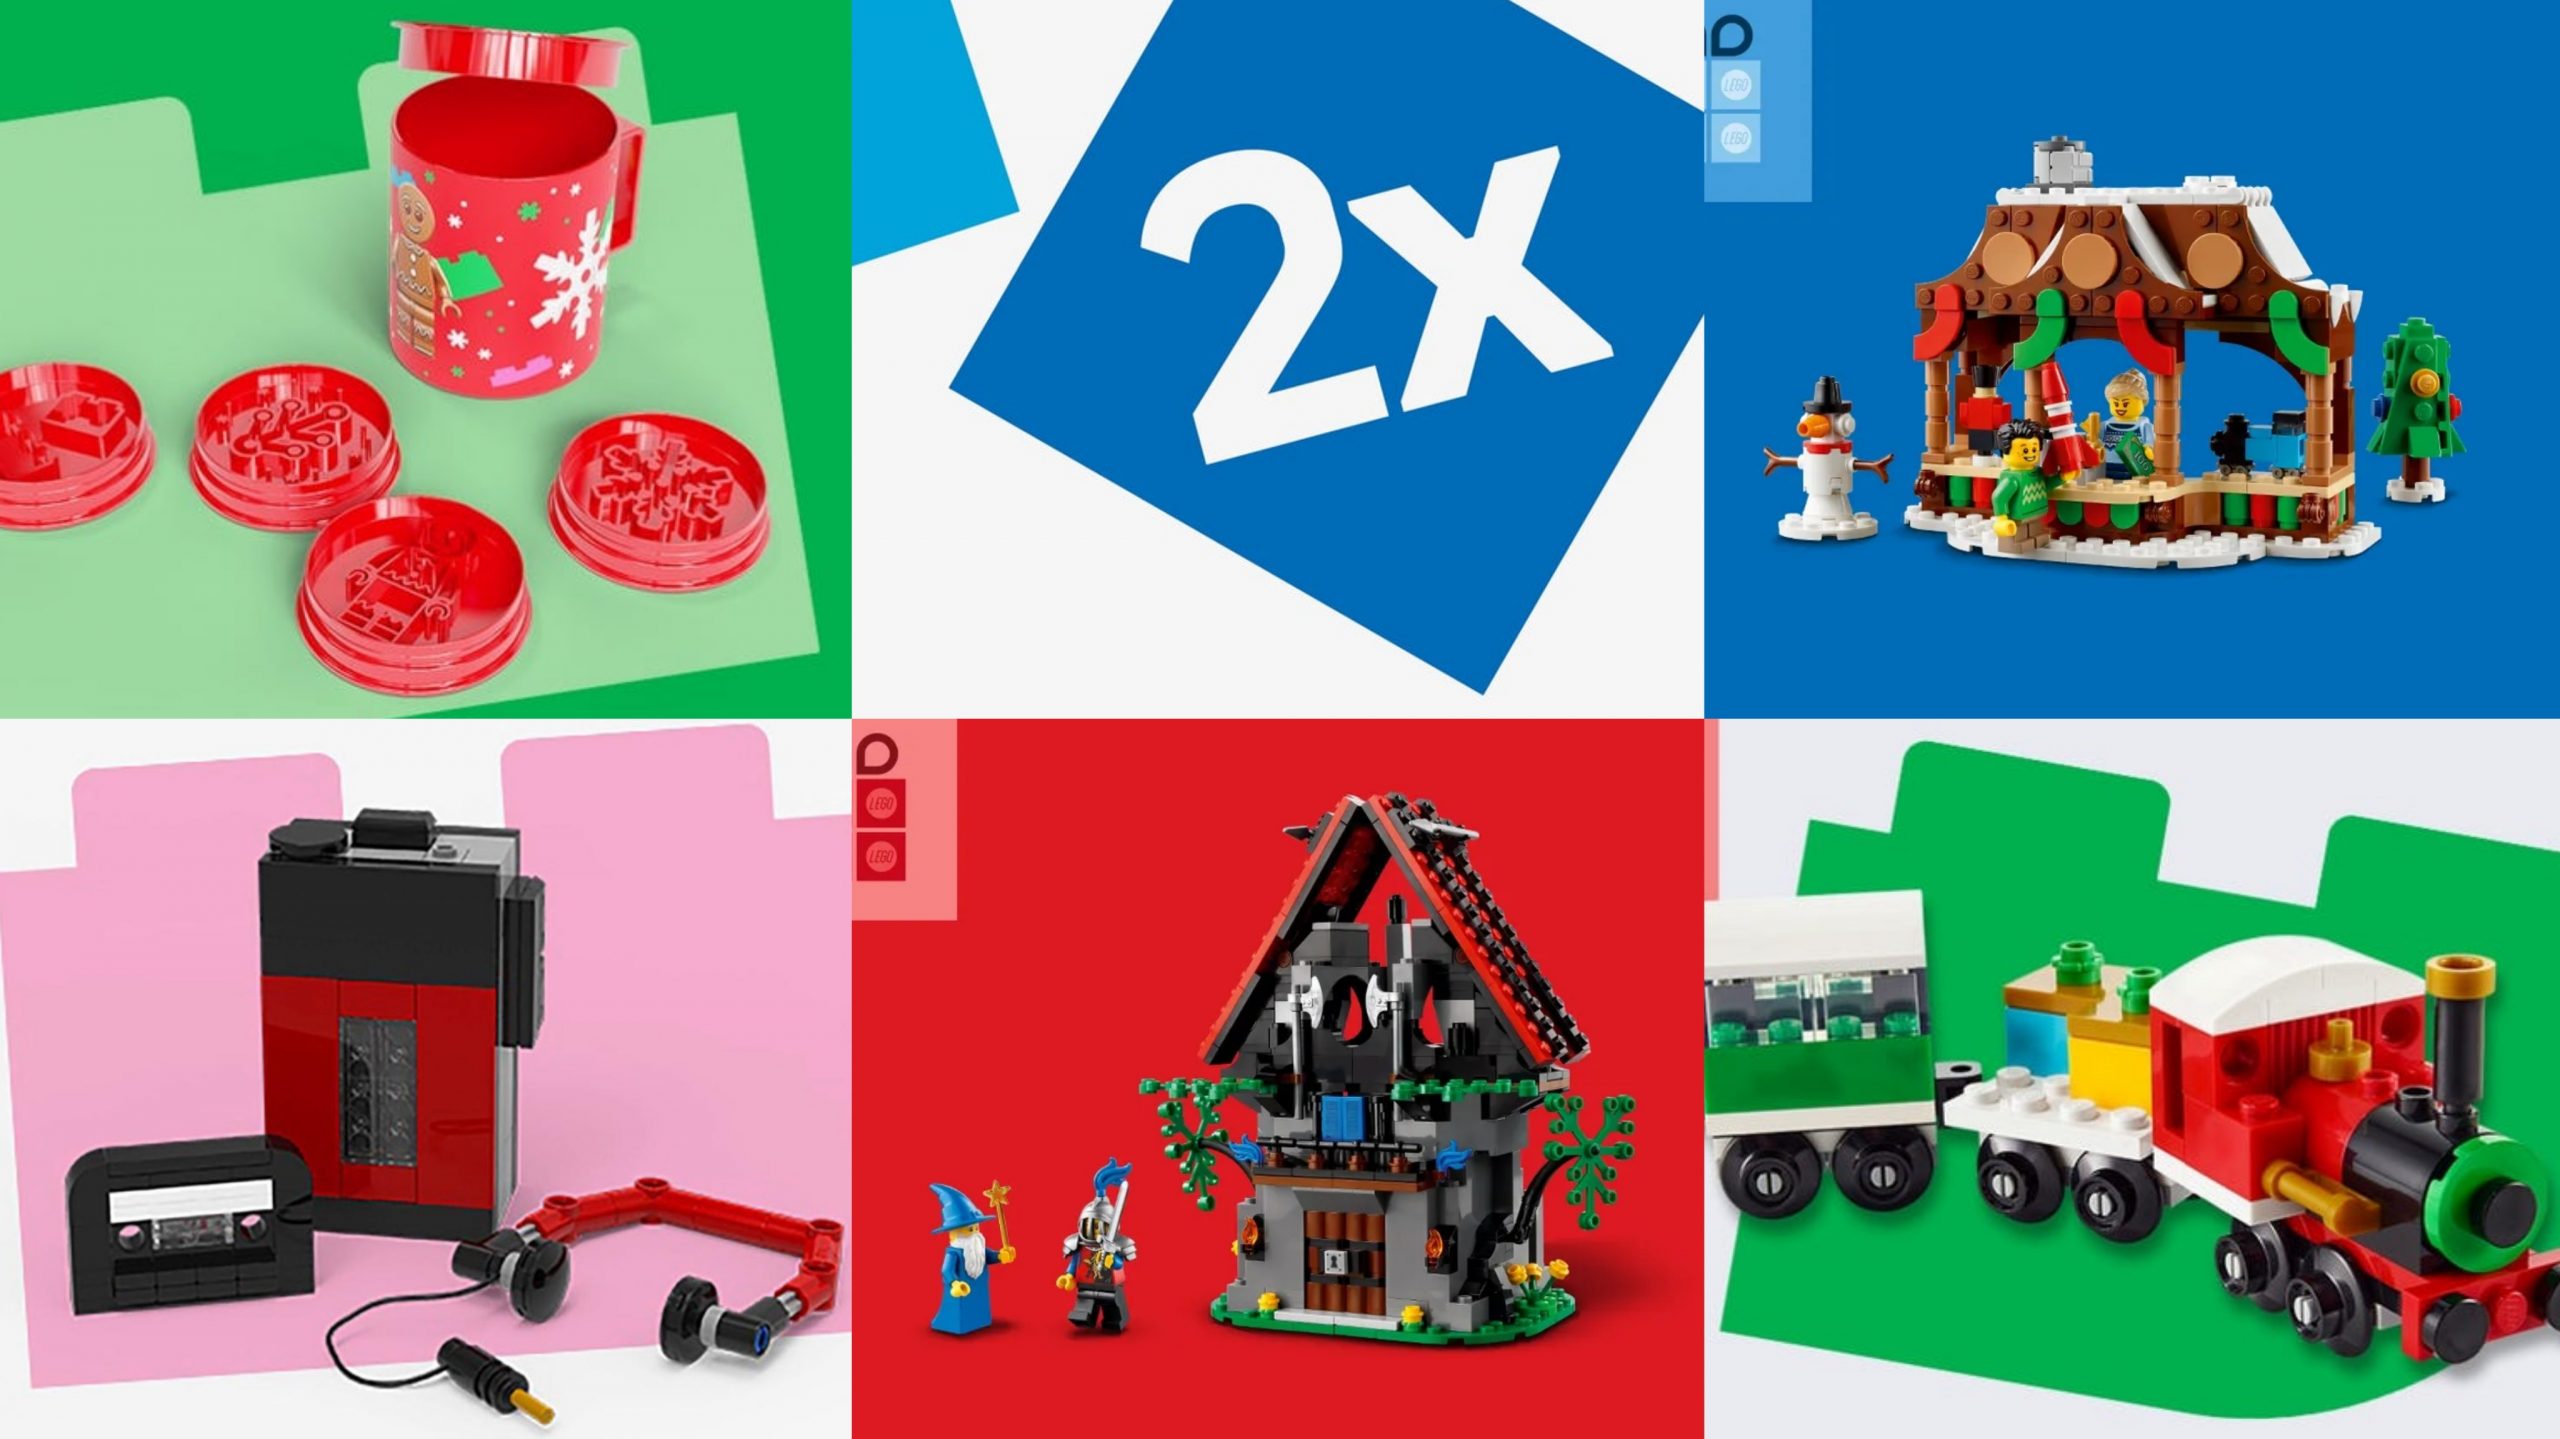 LEGO Gift-With-Purchase – Christmas Fun VIP Add-On Pack 40609